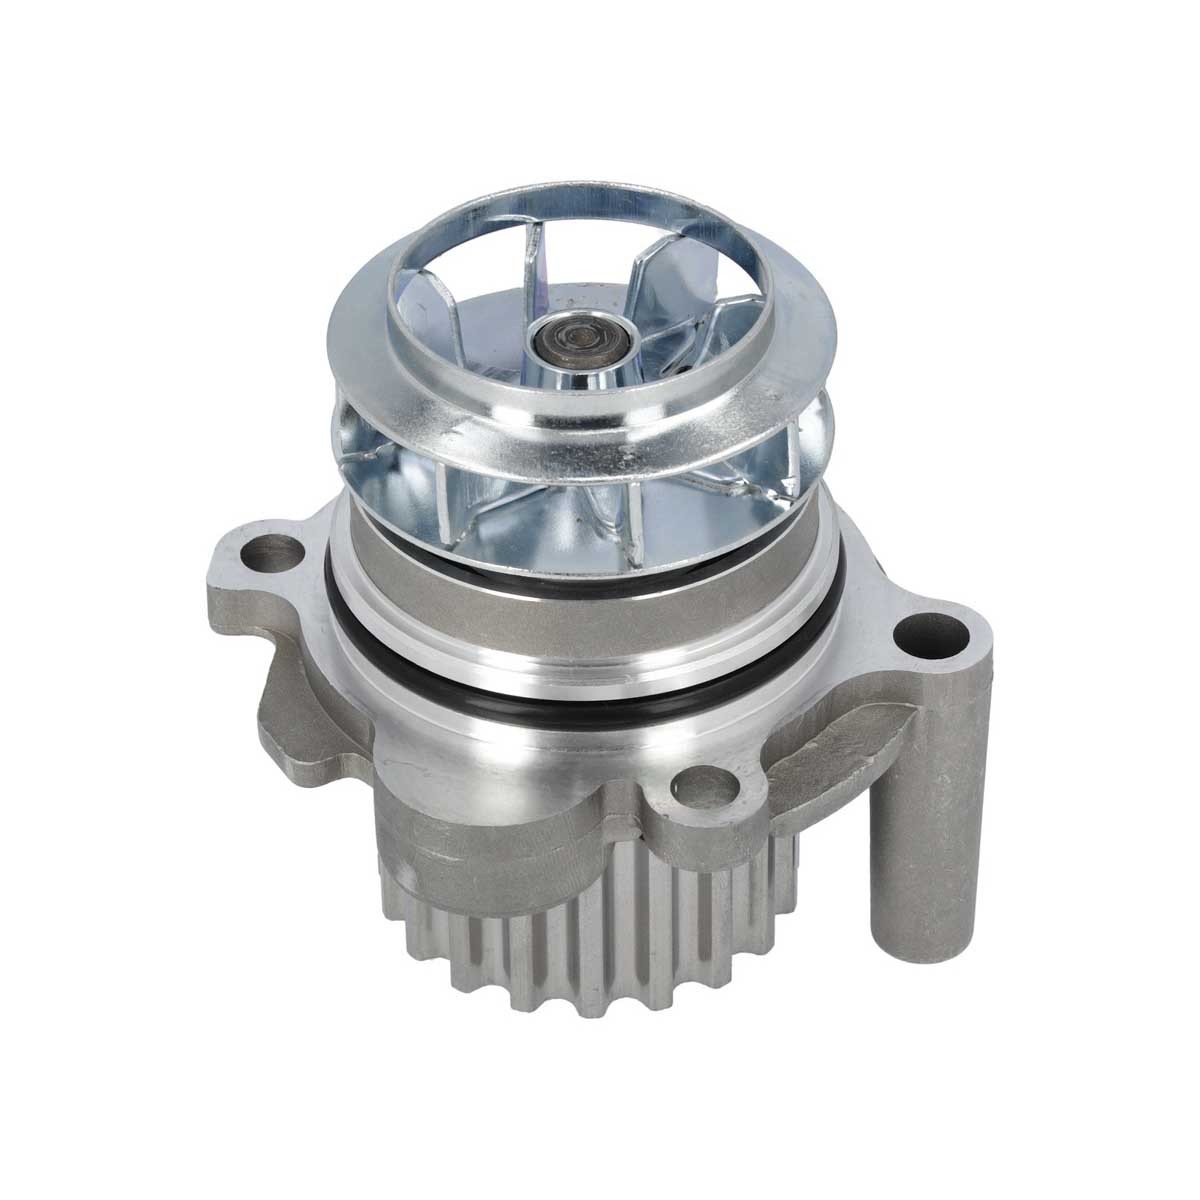 MWP0167HD MEYLE Number of Teeth: 19, with seal, Metal, Quality, for toothed belt drive Water pumps 113 220 0021/HD buy